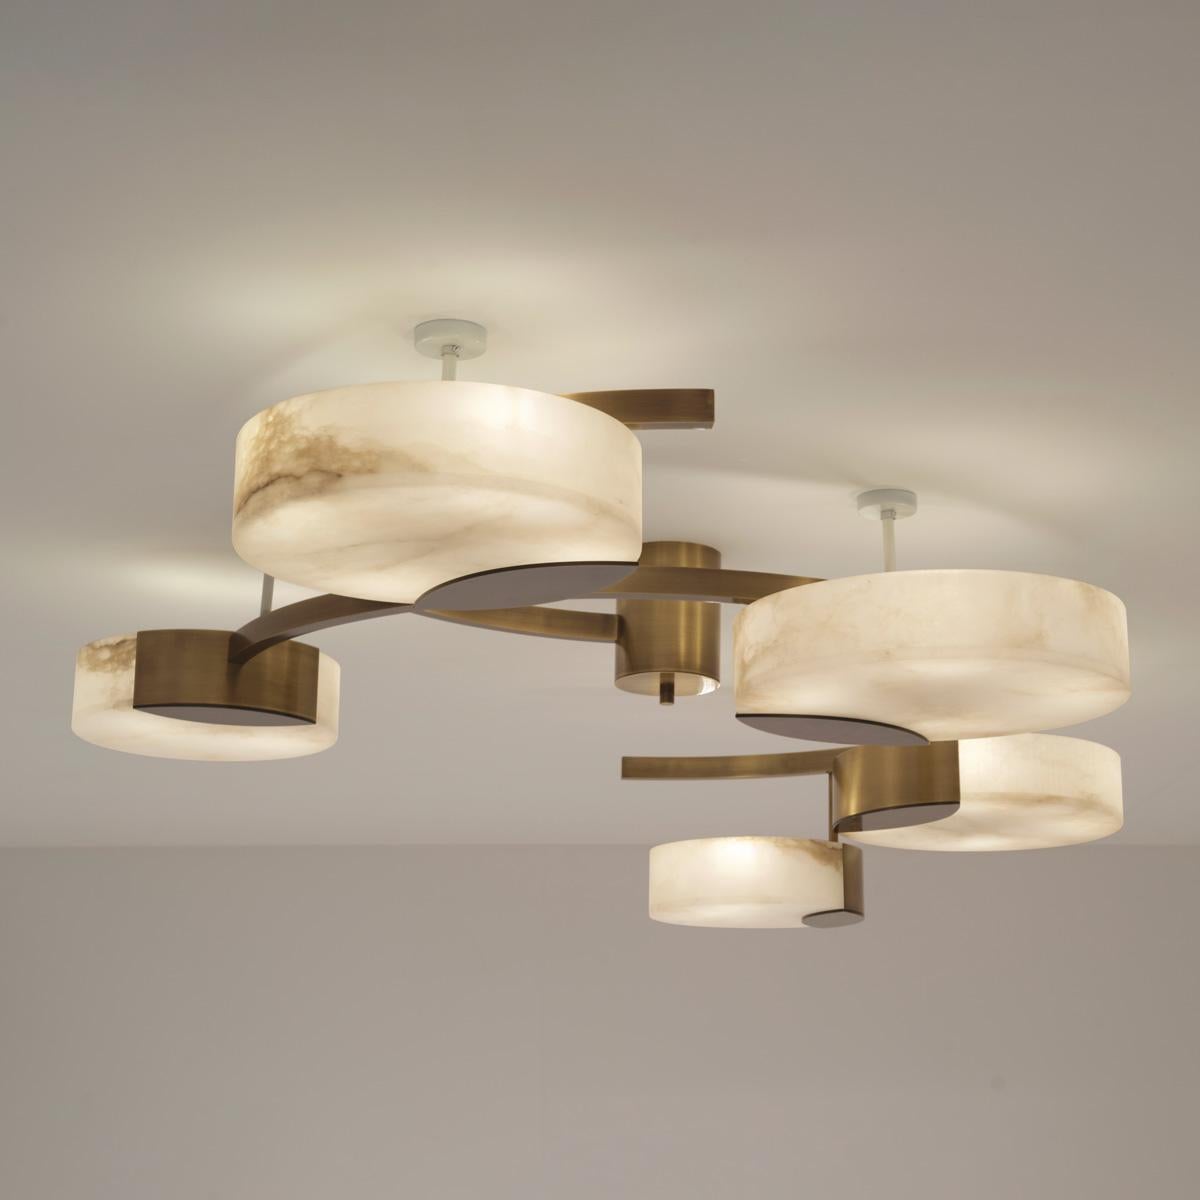 Cloud N.5 Ceiling Light by Gaspare Asaro-Satin Brass Finish For Sale 3